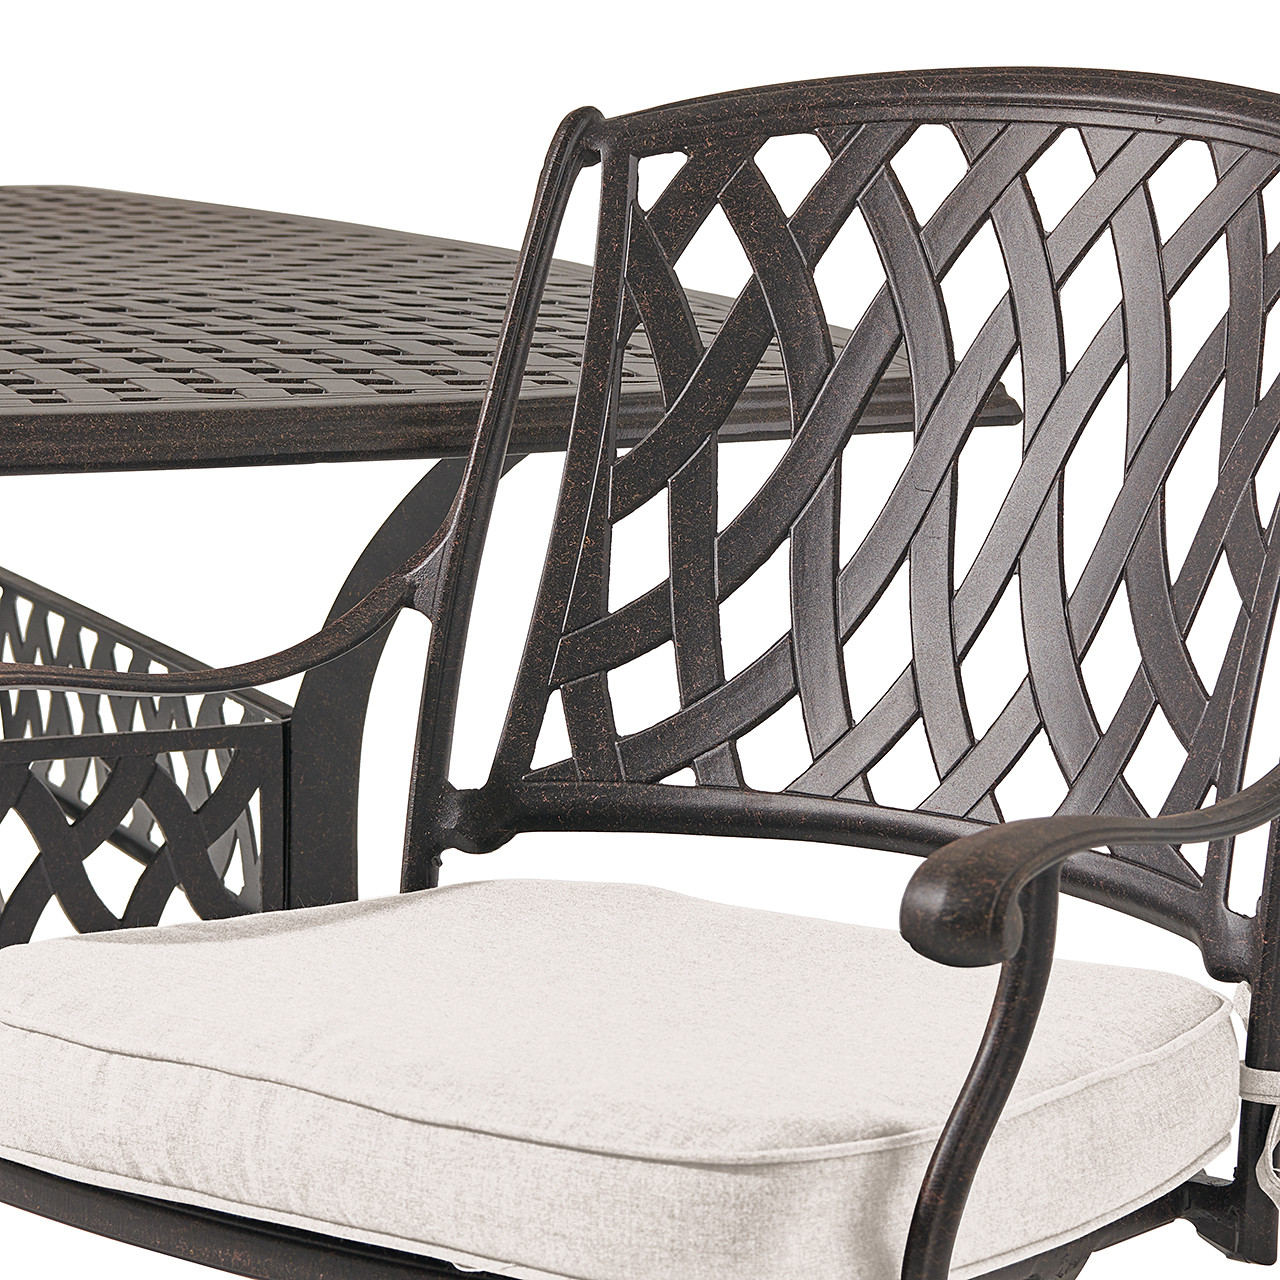 Tivoli Aged Bronze Cast Aluminum with Cushions 7 Piece Swivel Dining Set with 72 x 42 in. Table